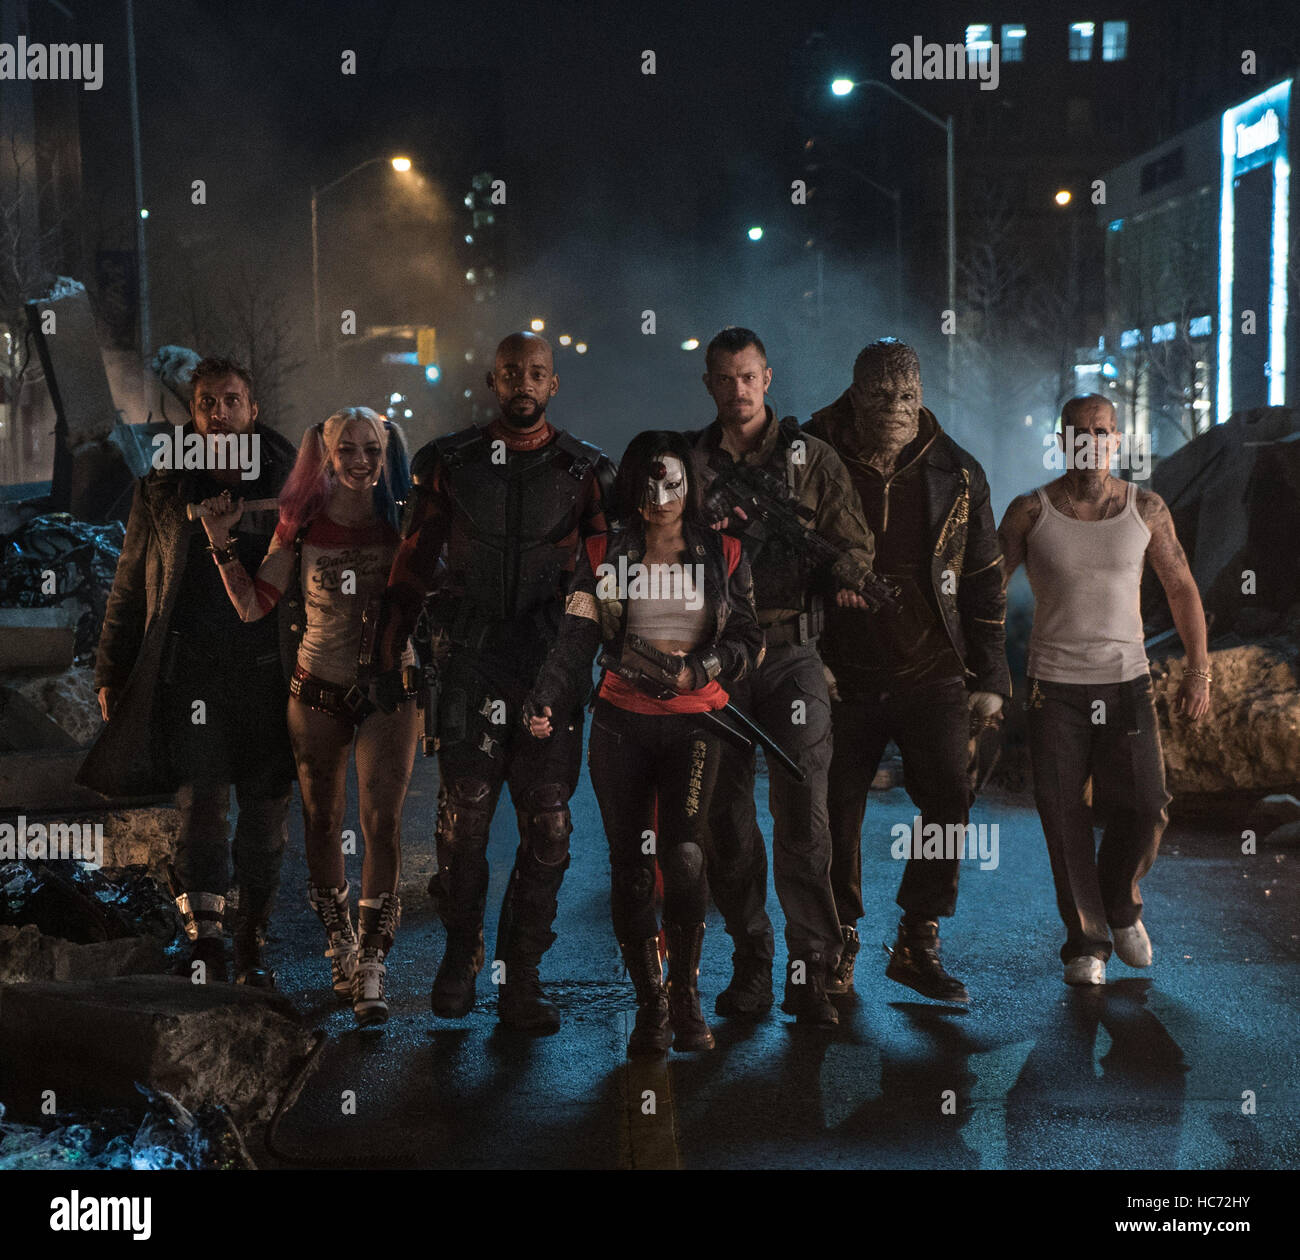 RELEASE DATE: August 5, 2016 TITLE: Suicide Squad STUDIO: Atlas Entertainment DIRECTOR: David Ayer PLOT: A secret government agency recruits imprisoned supervillains to execute dangerous black ops missions in exchange for clemency STARRING: JAI COURTNEY as Boomerang, WILL SMITH as Deadshot, MARGOT ROBBIE as Harley Quinn, DEWALE AKINNUOYE-AGBAJE as Killer Croc, JOEL KINNAMAN as Rick Flagg, JARED LETO as the joker. (Credit Image: c Atlas Entertainment/Entertainment Pictures/) Stock Photo